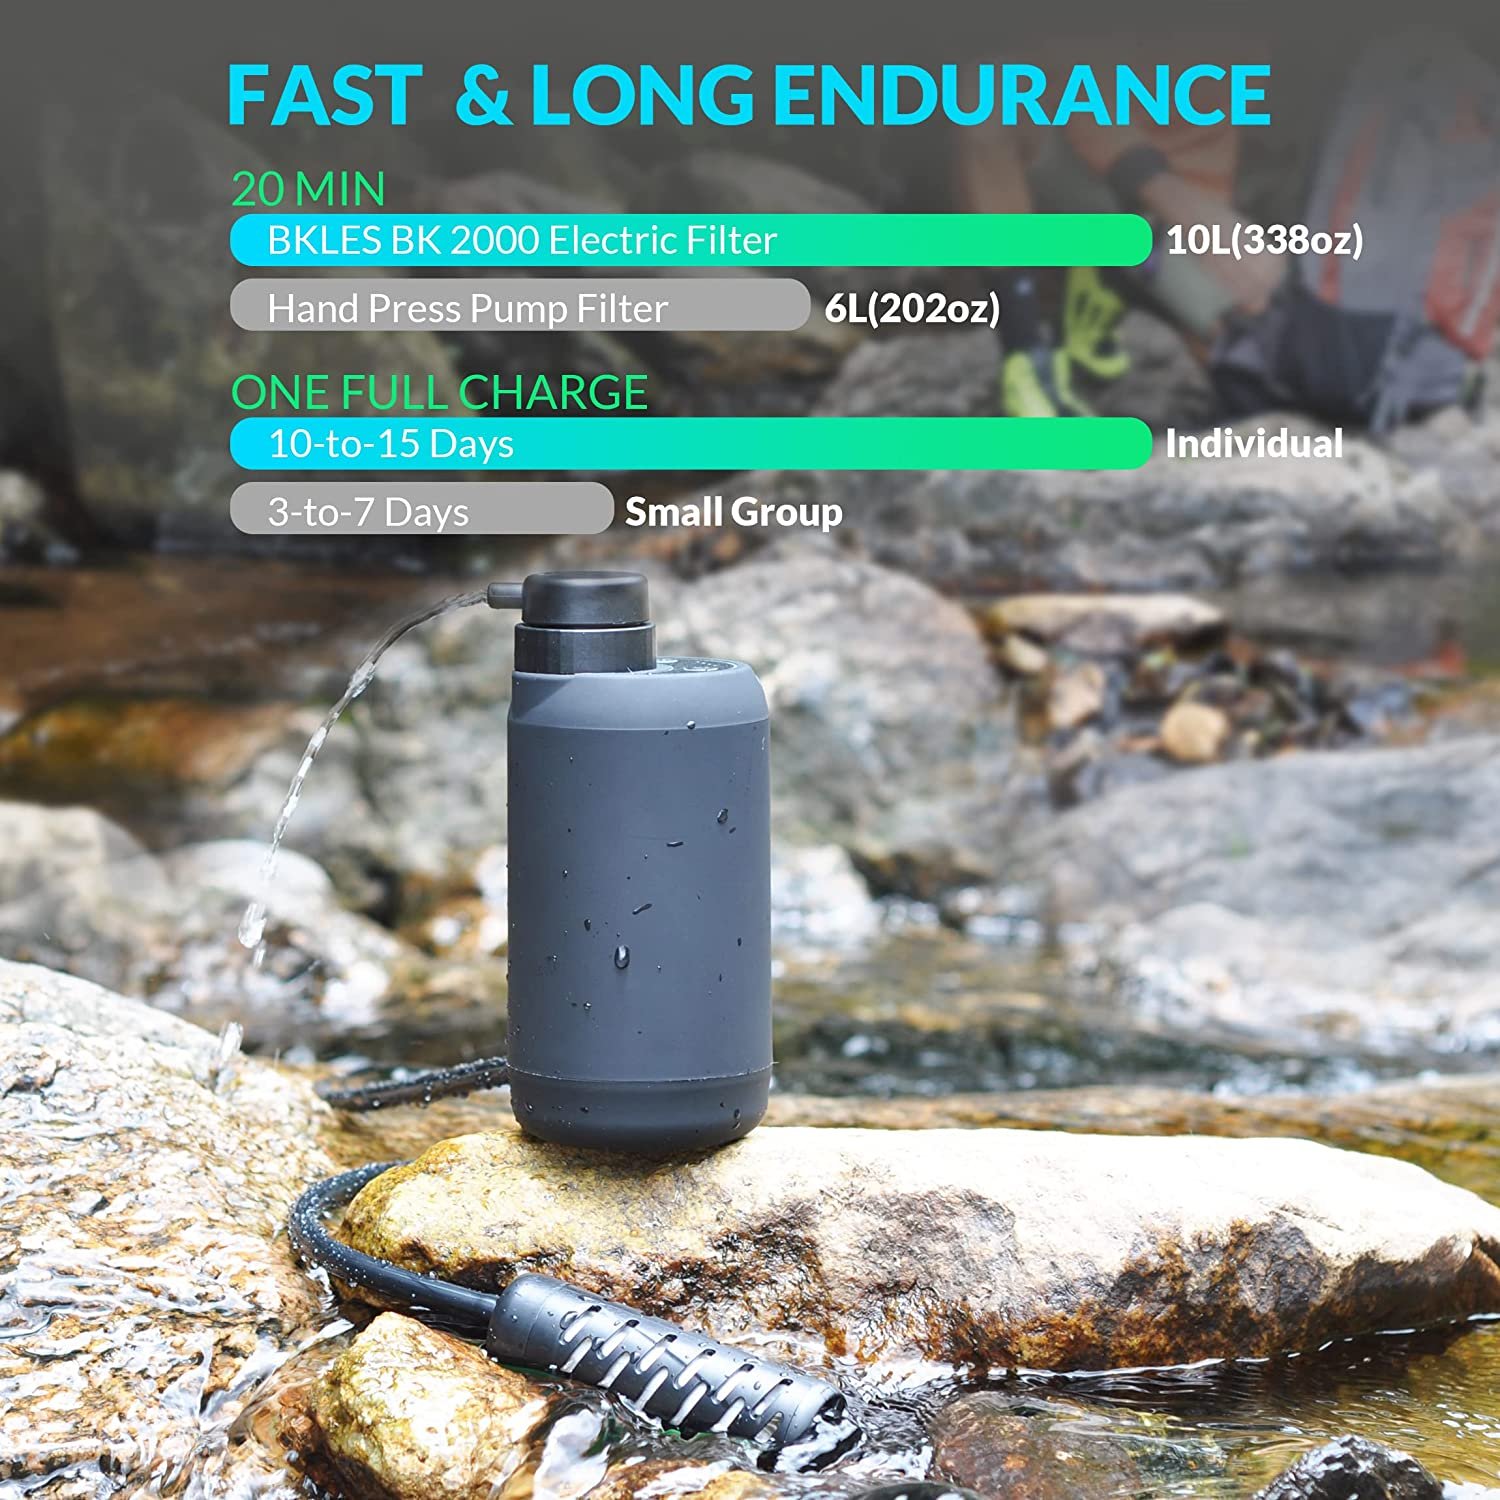 BKLES Electric Water Purifier Survival, 0.01 Micron '5-Stage' Water Filtration System Survival with Emergency Lighting Water Filter for Camping